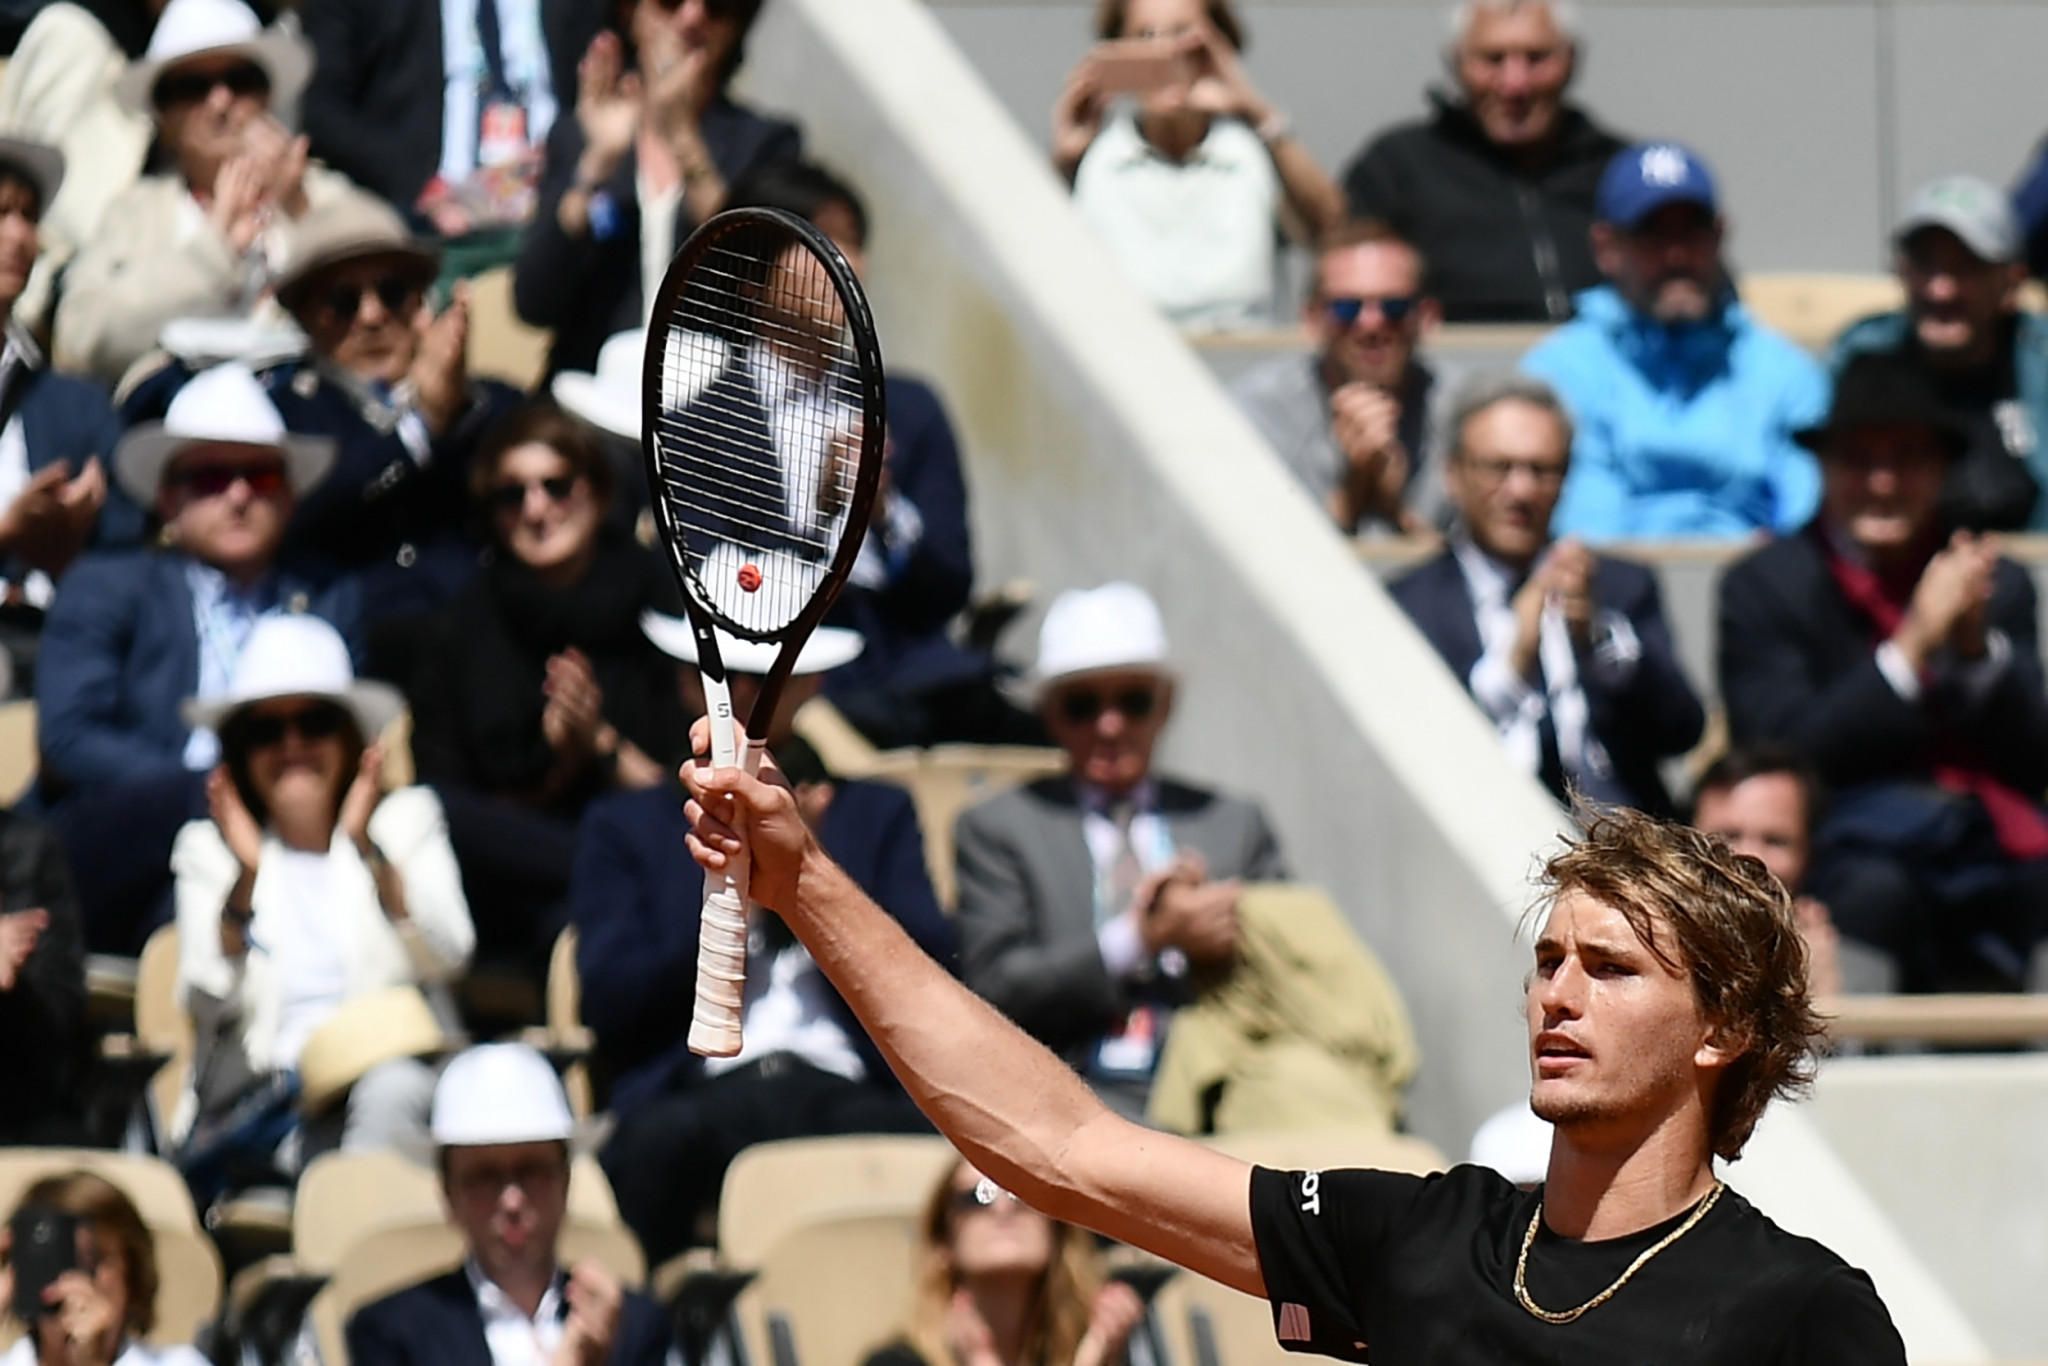 Zverev battles through frustration to reach second round  at French Open